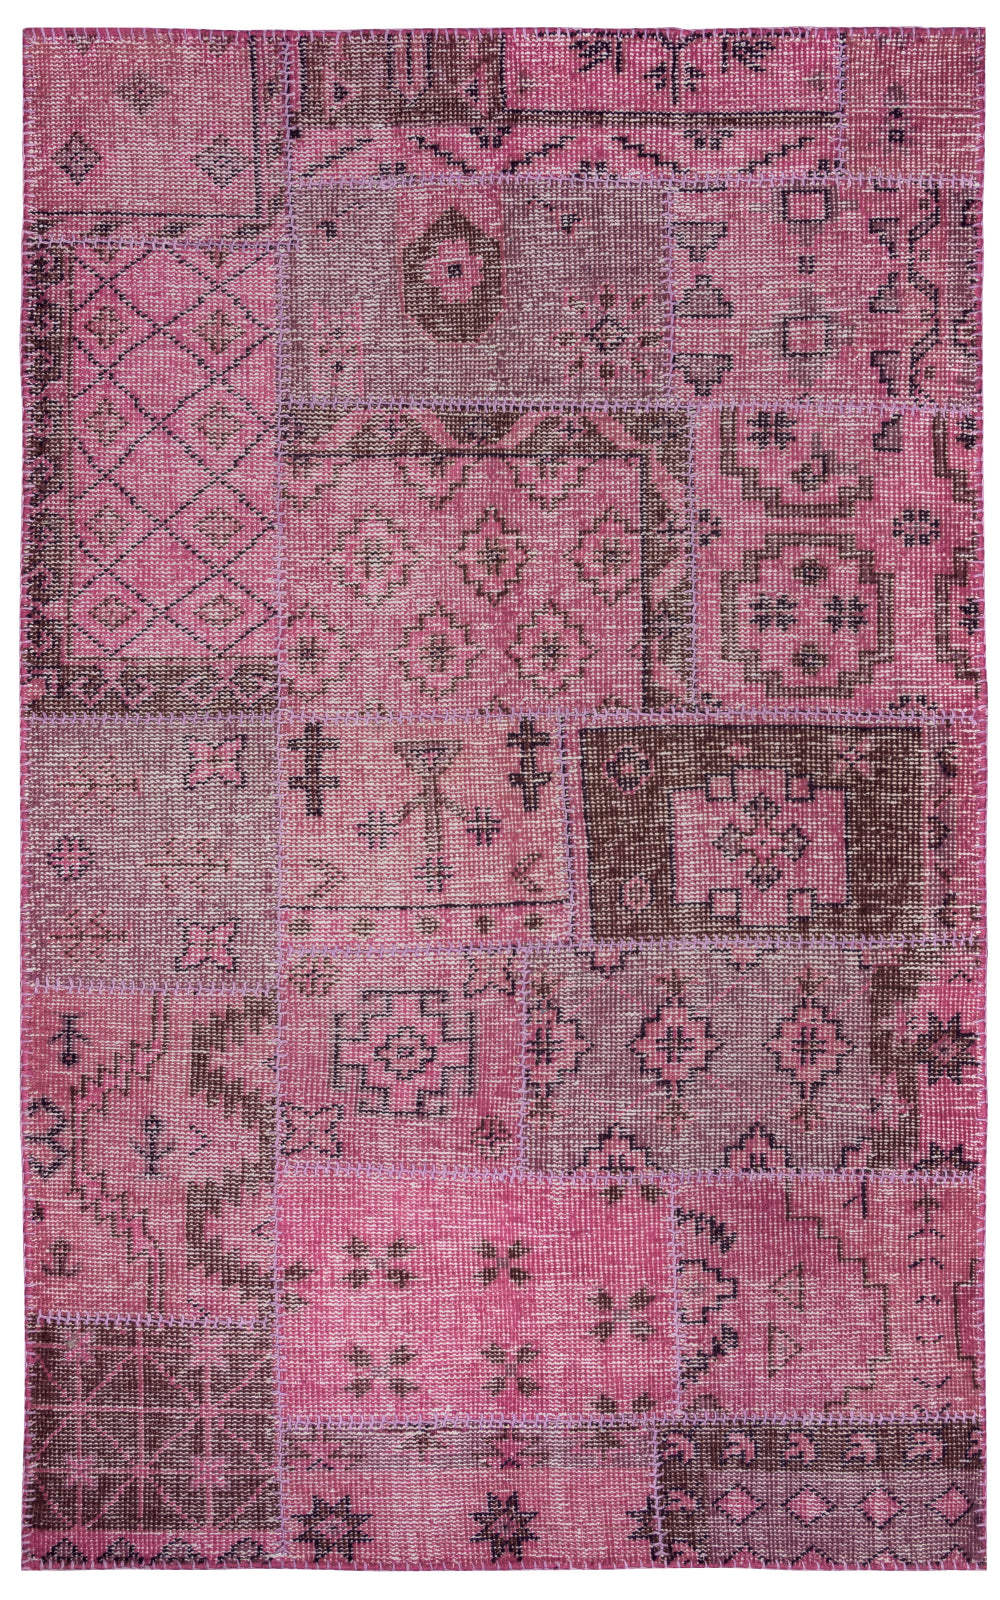 Rizzy Maison MS8934 pink Area Rug main image